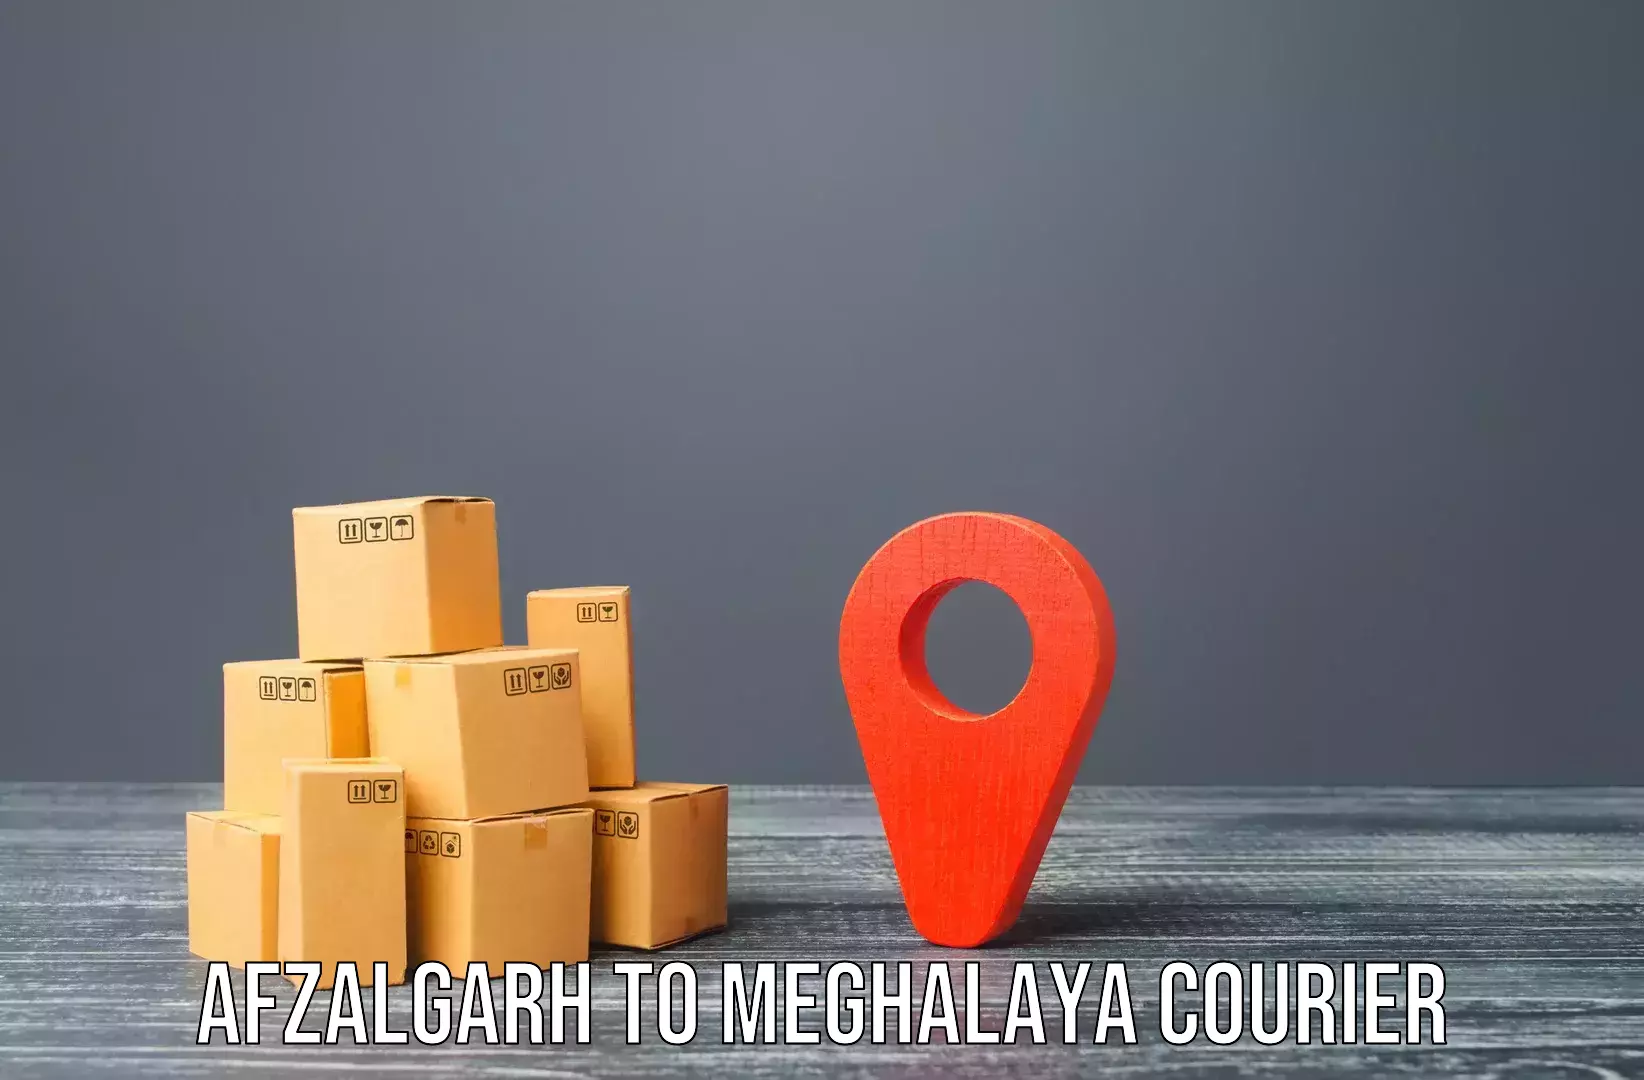 Moving and handling services in Afzalgarh to Meghalaya